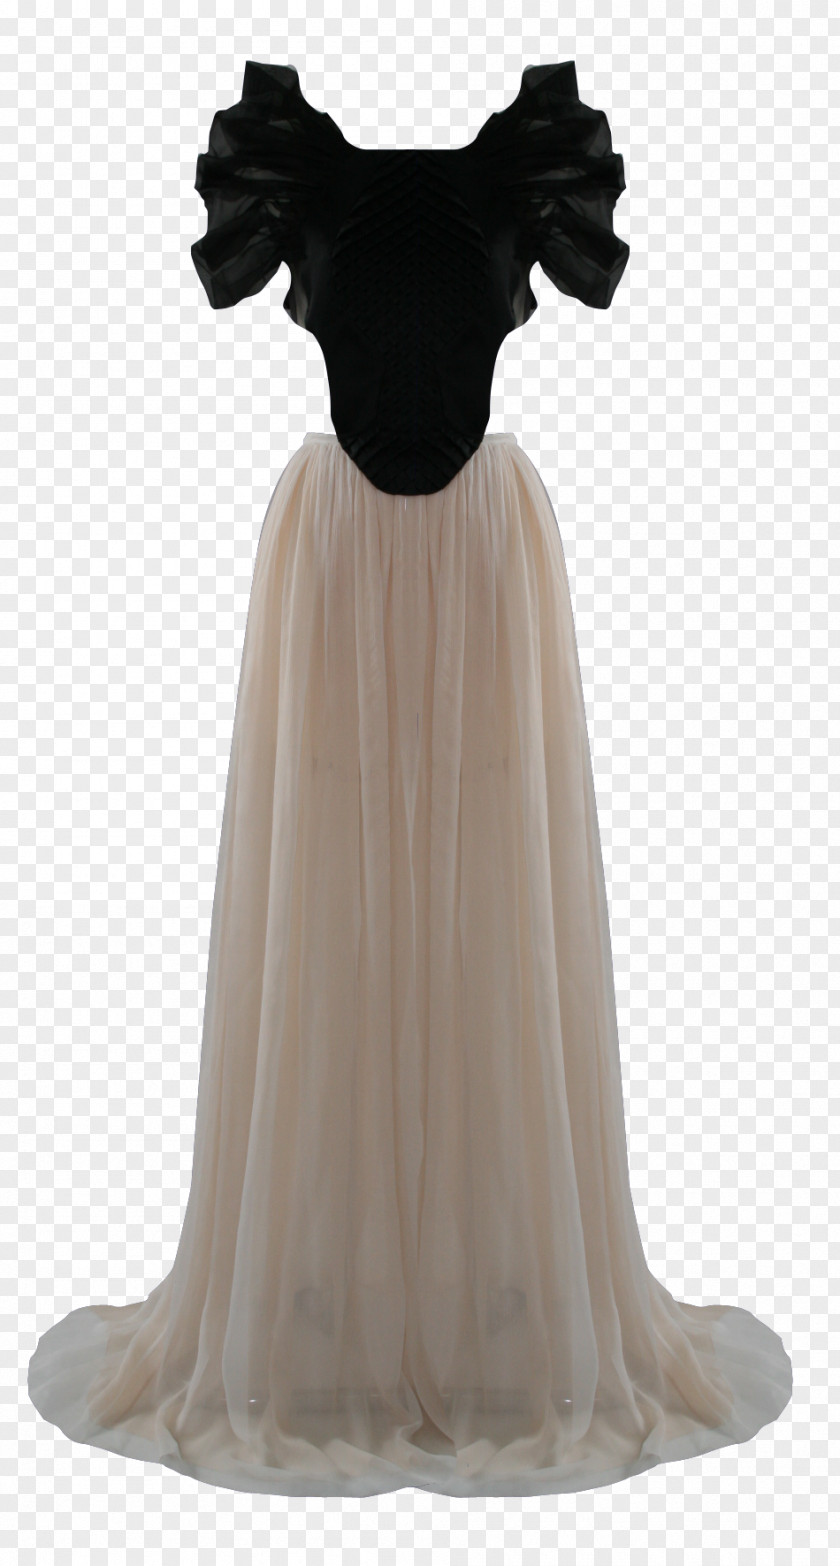 Dress Cocktail Party Gown Wedding PNG